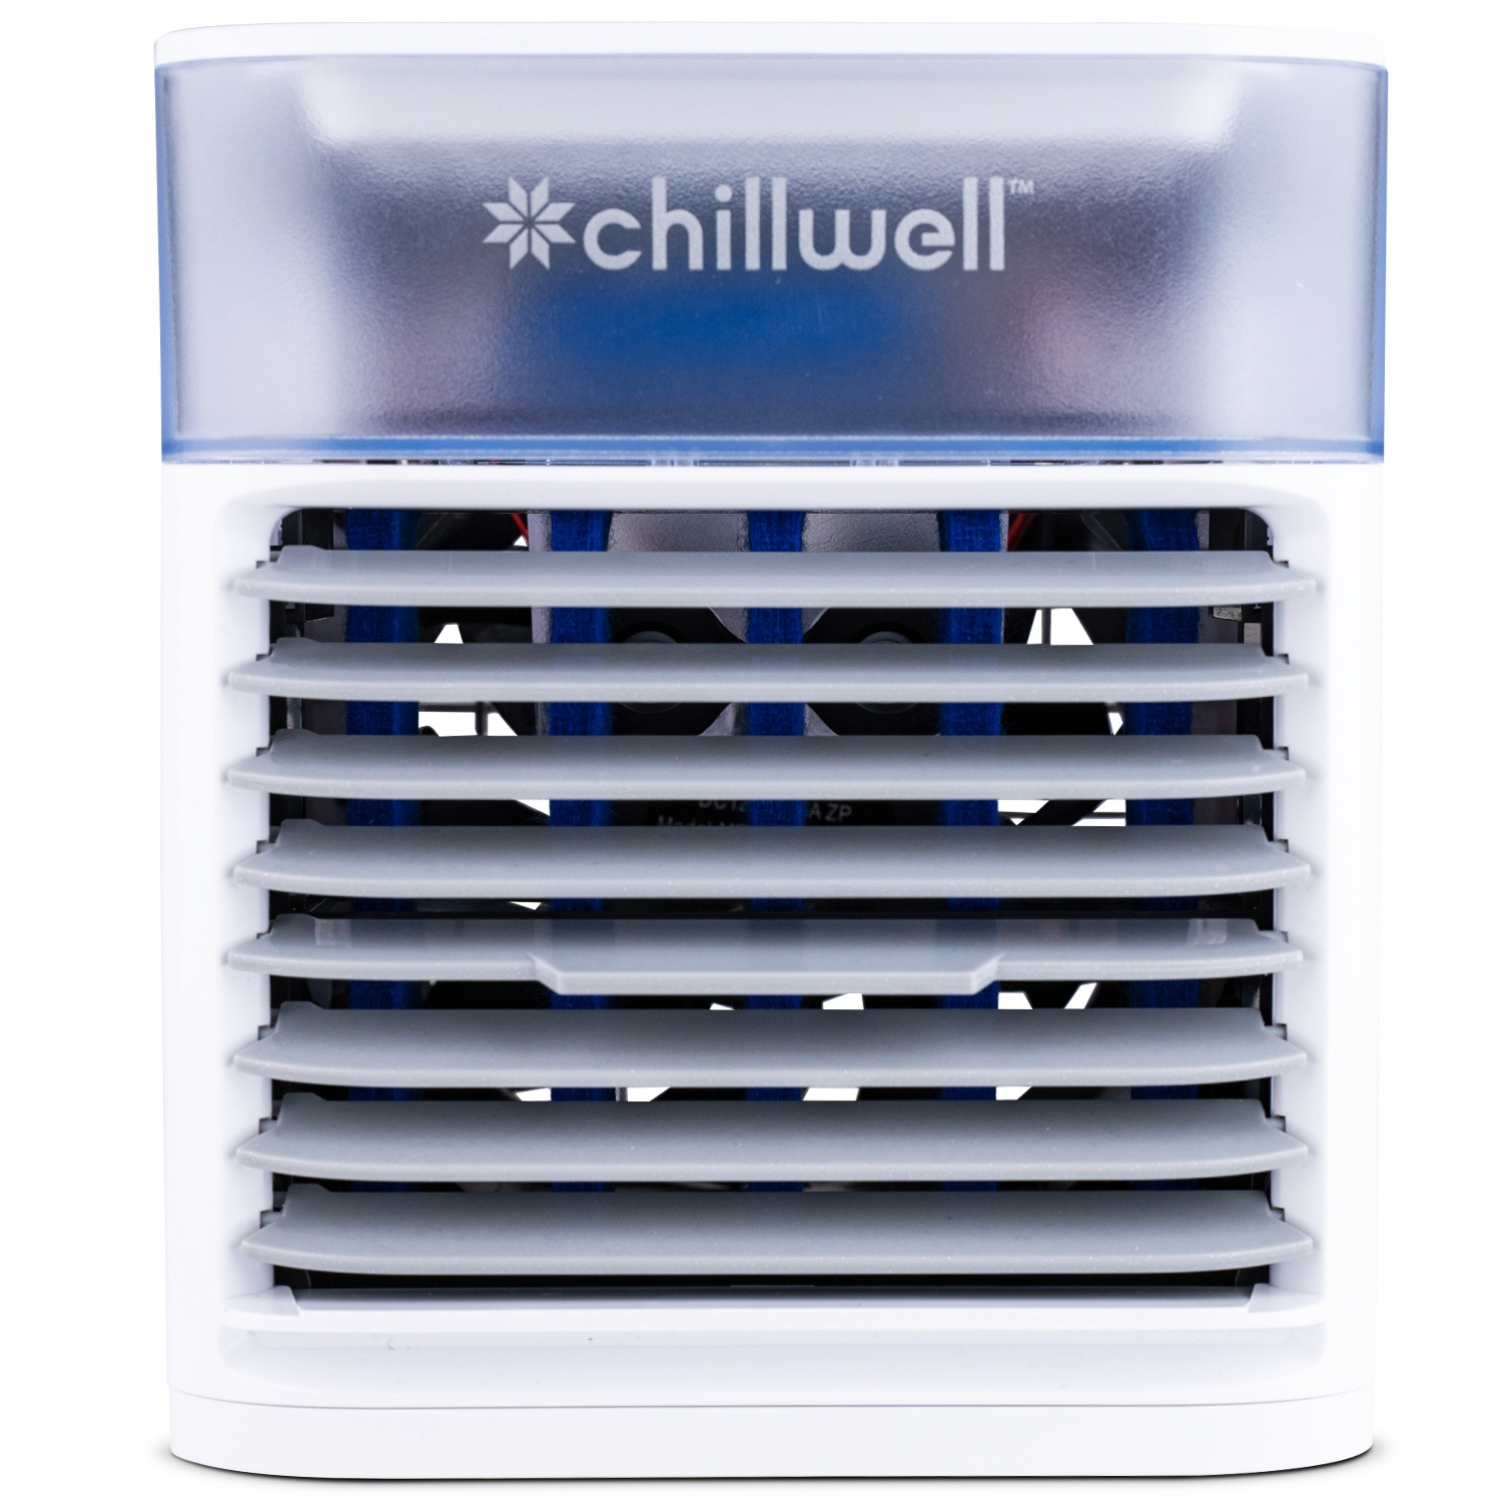 Ac Chillwell Ac Conditioning